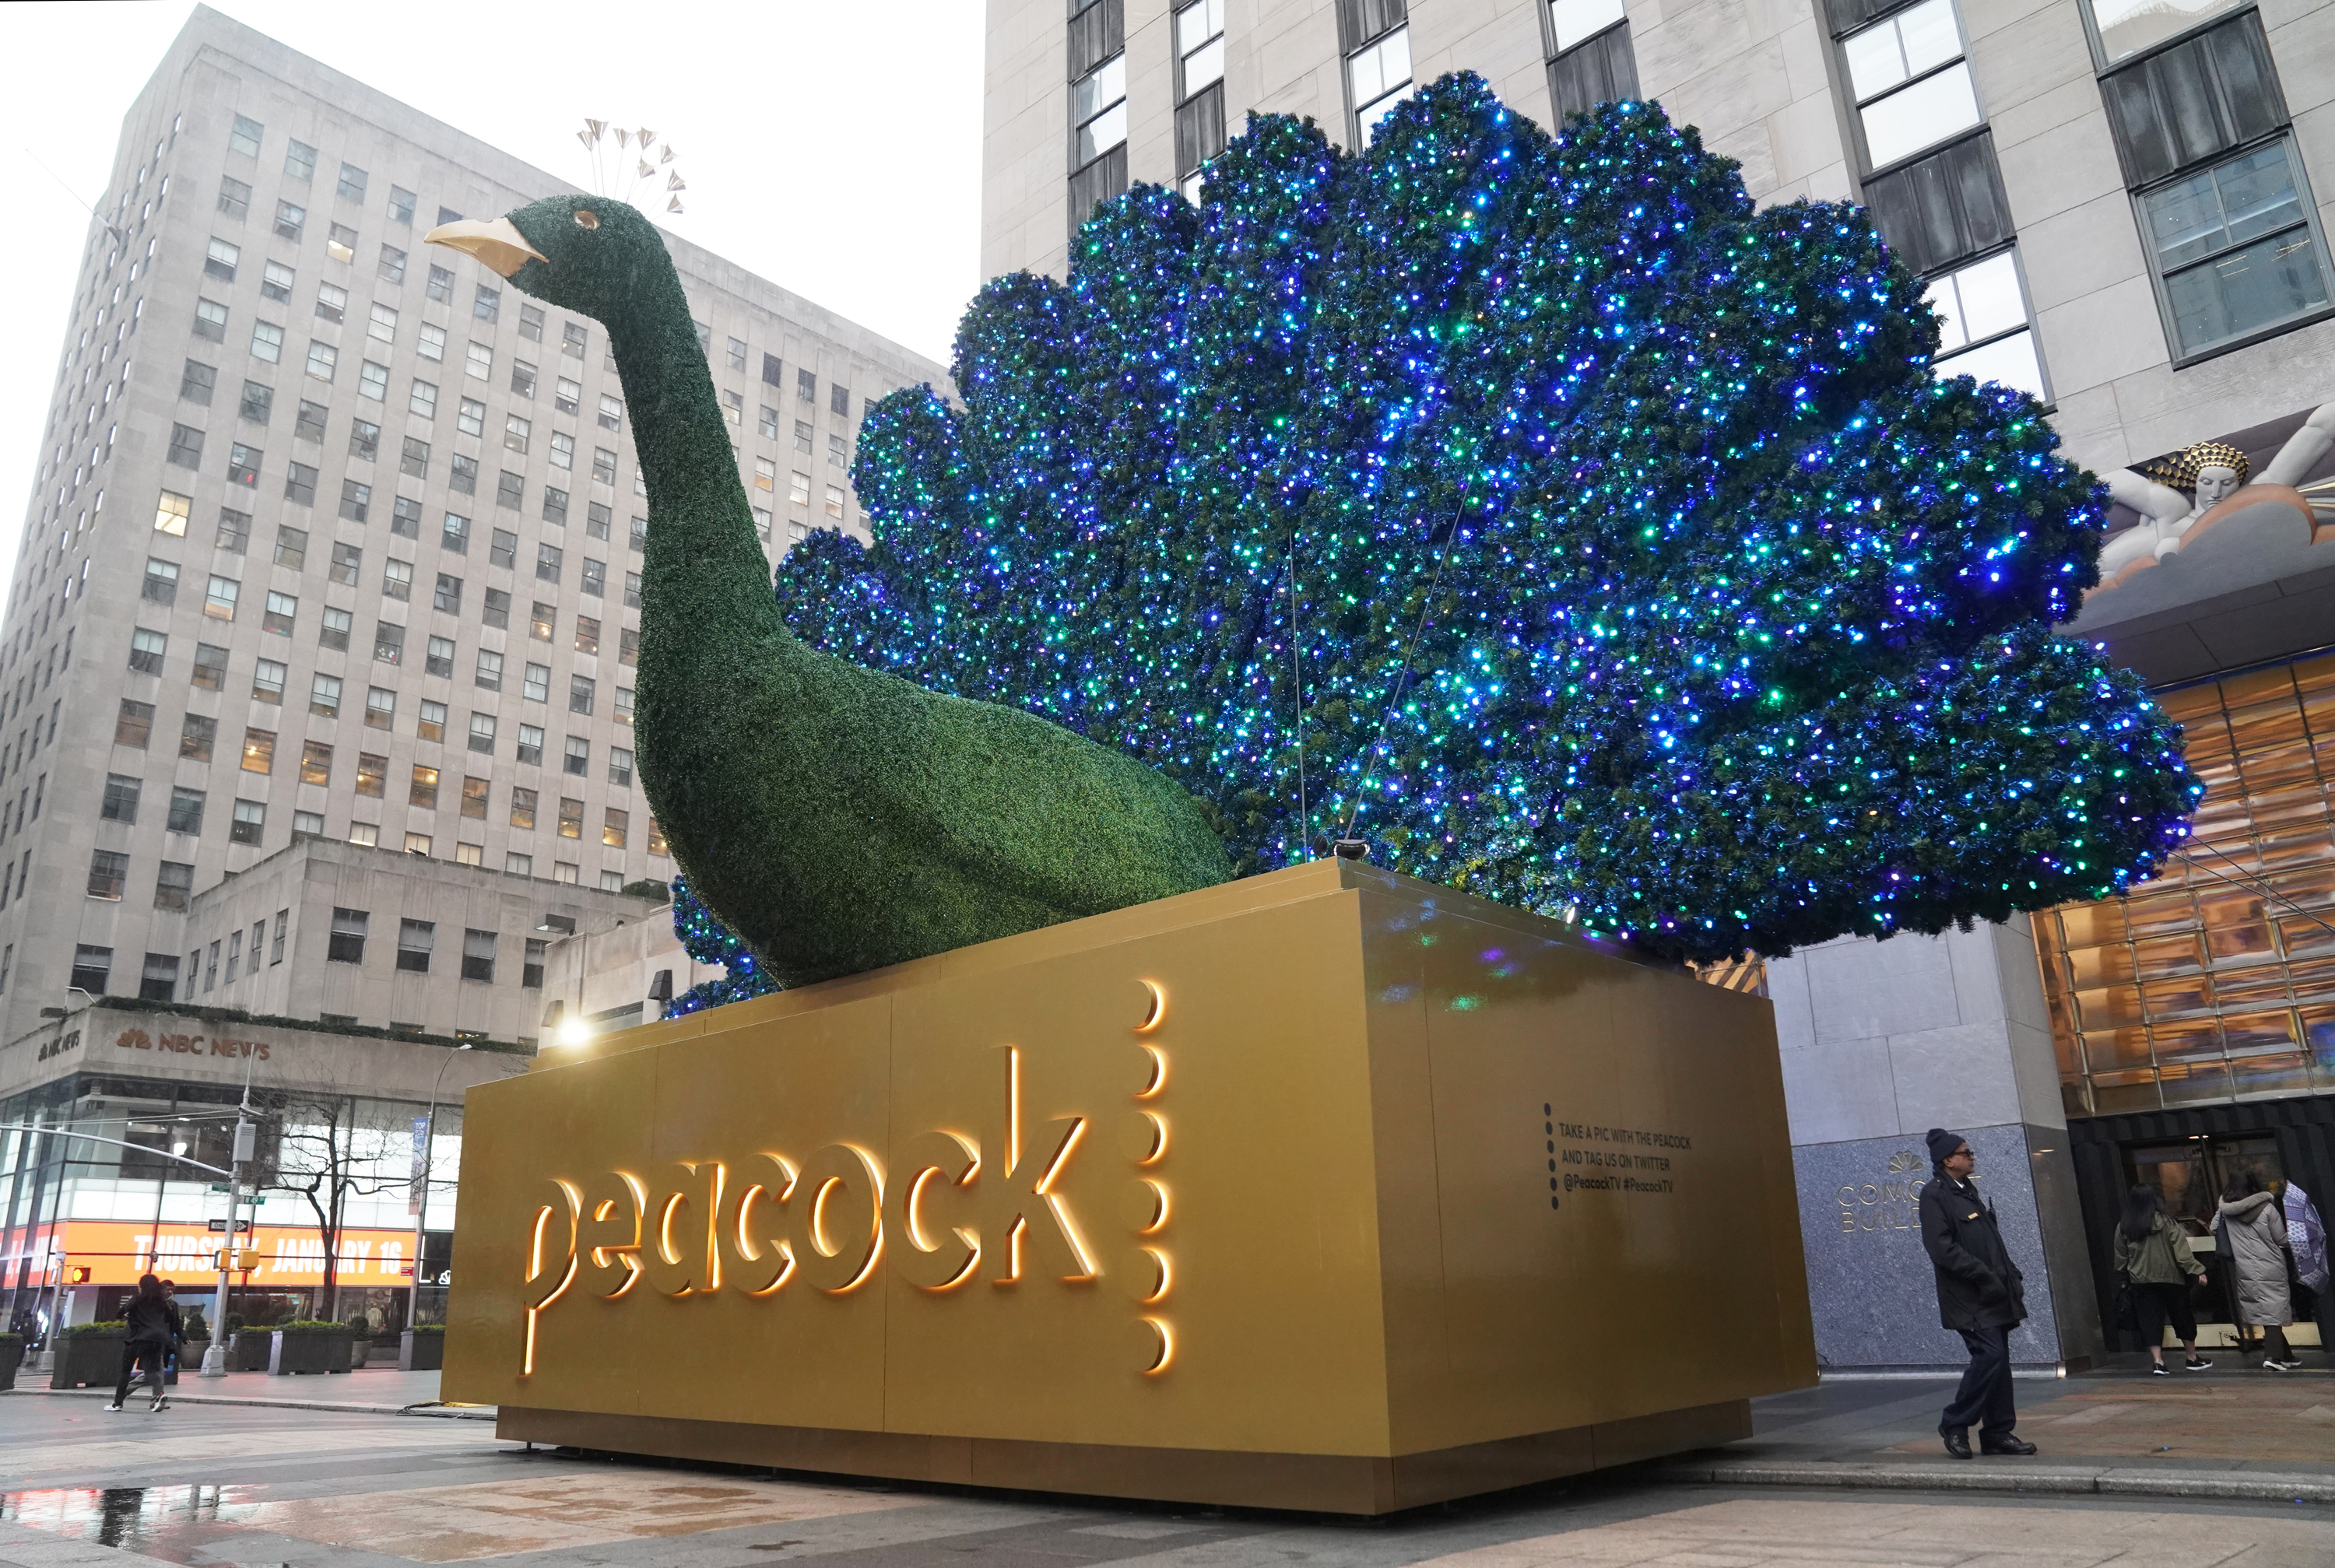 peacock on playstation